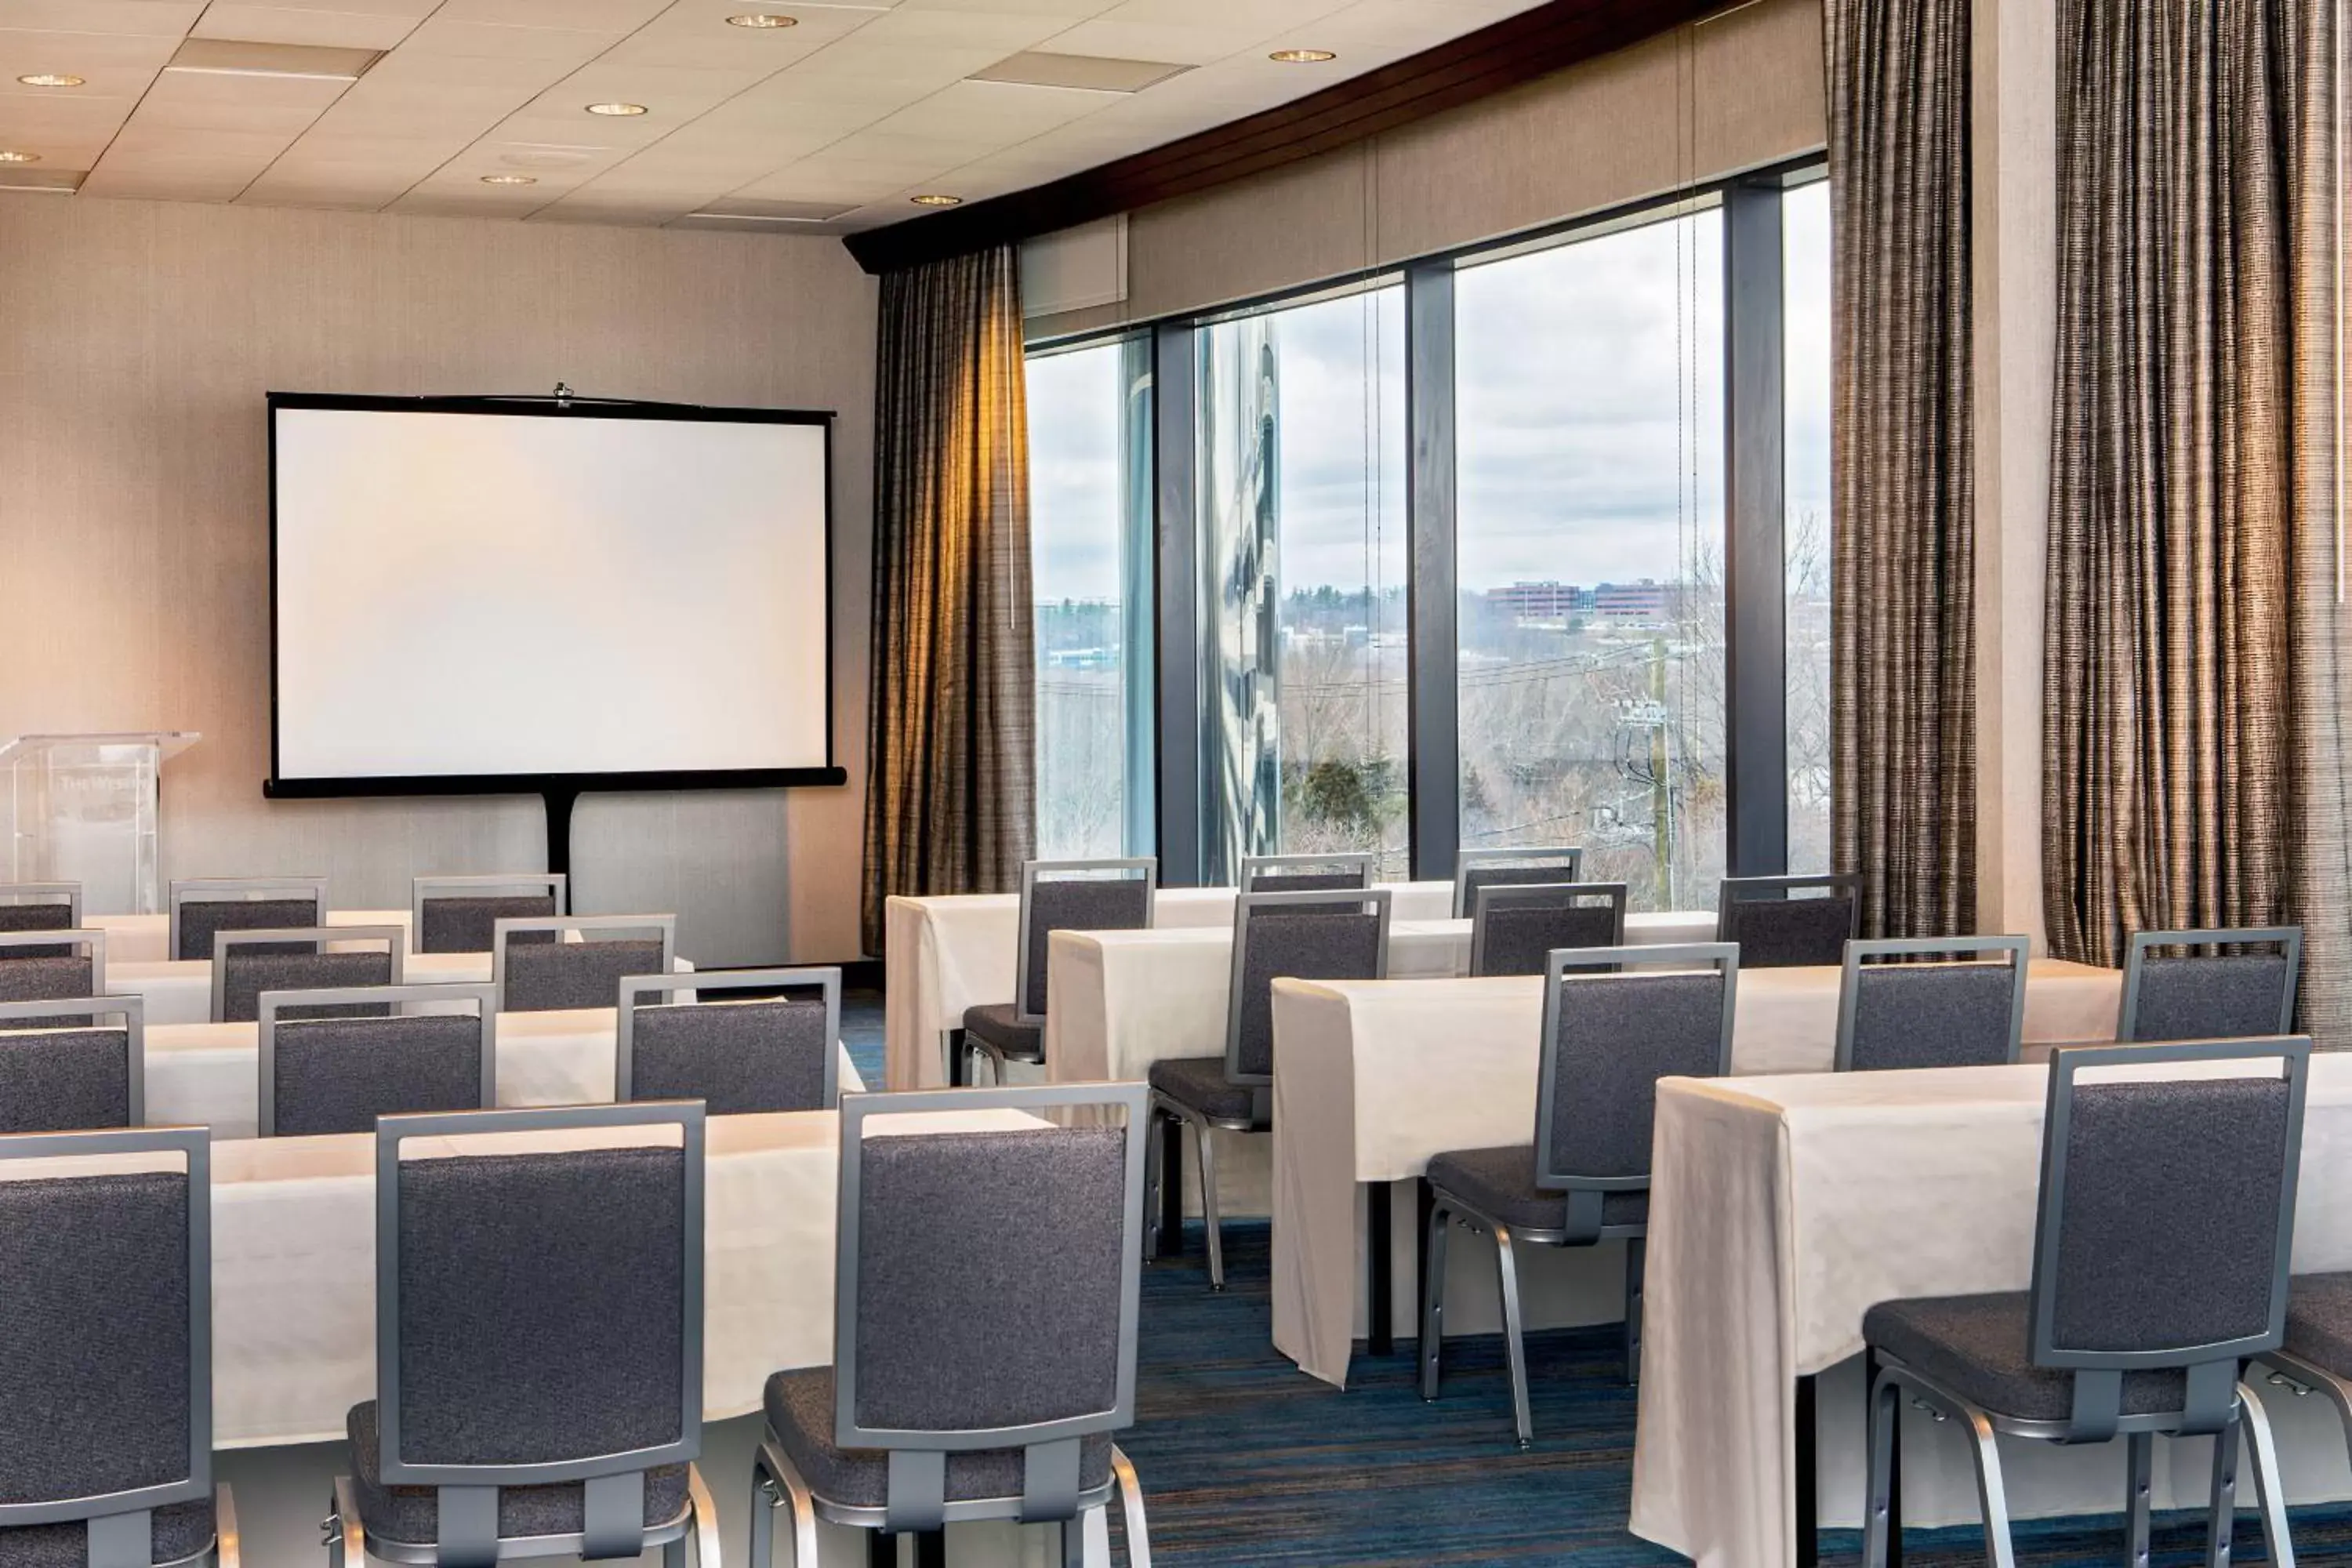 Meeting/conference room in The Westin Waltham Boston